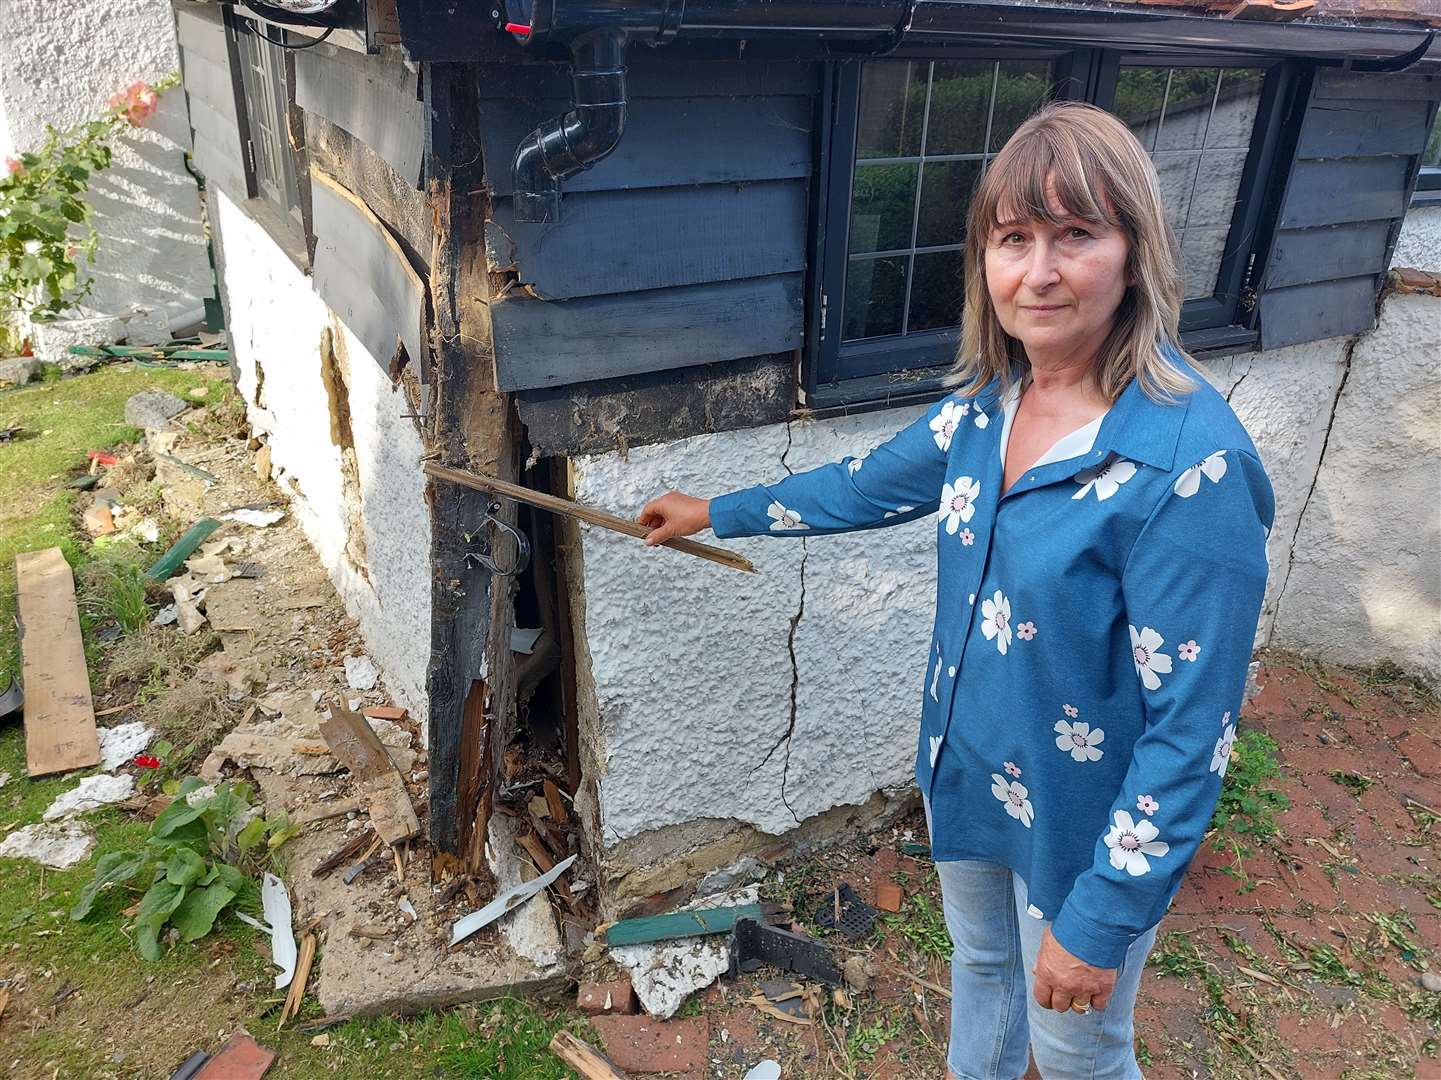 Herne villager Monika Burns inspecting the damage to her home